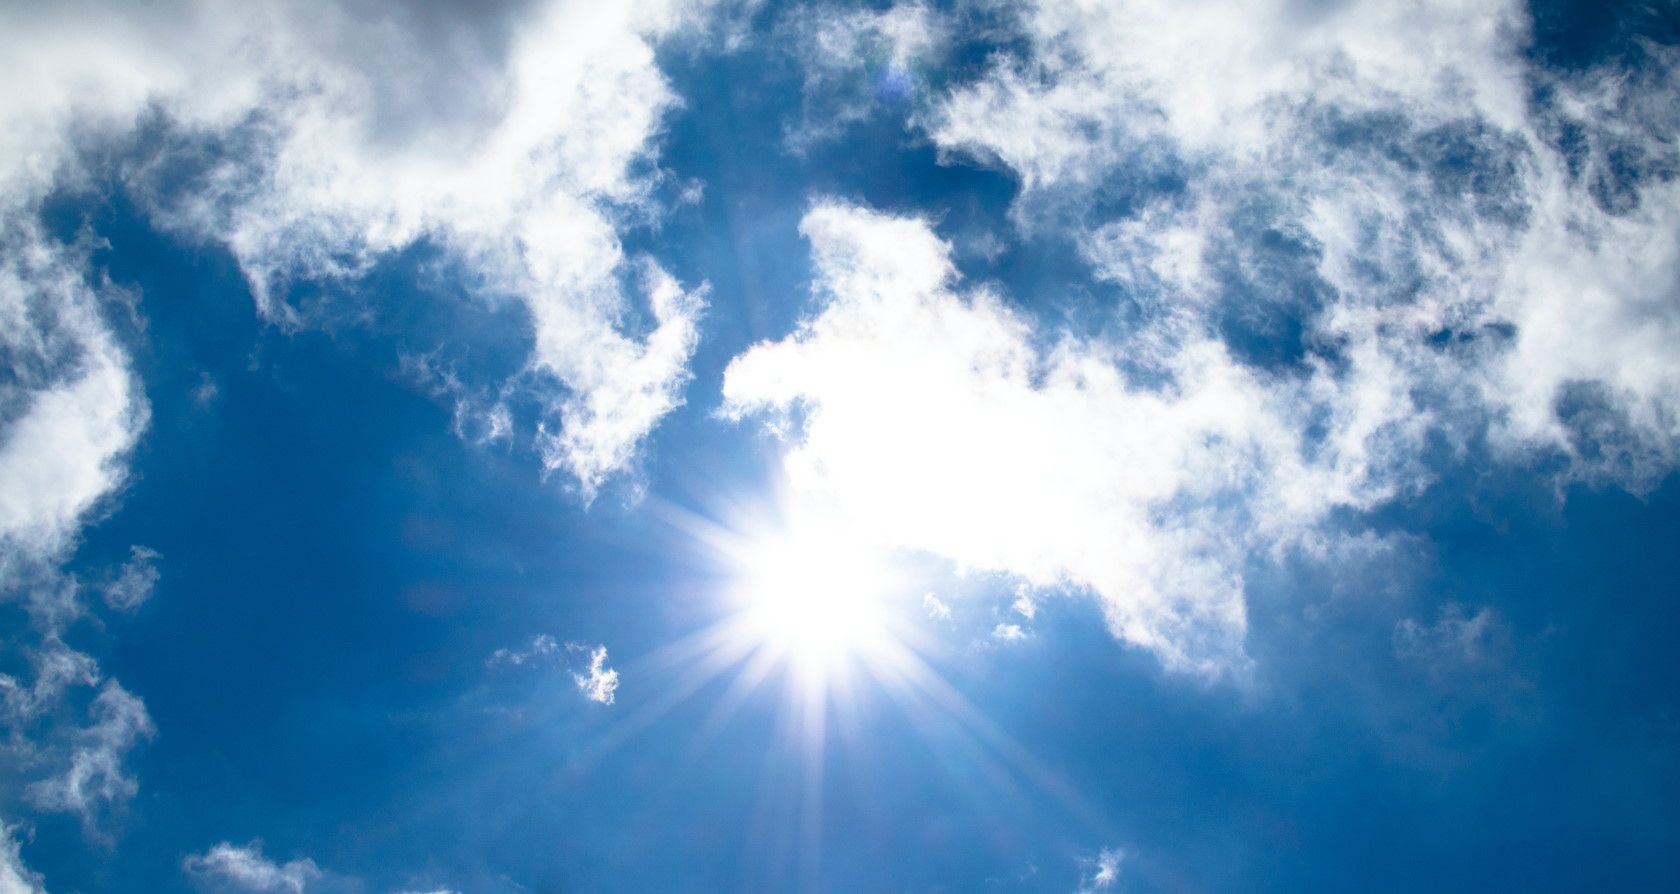 Bright sunlight shining through clouds with blue sky